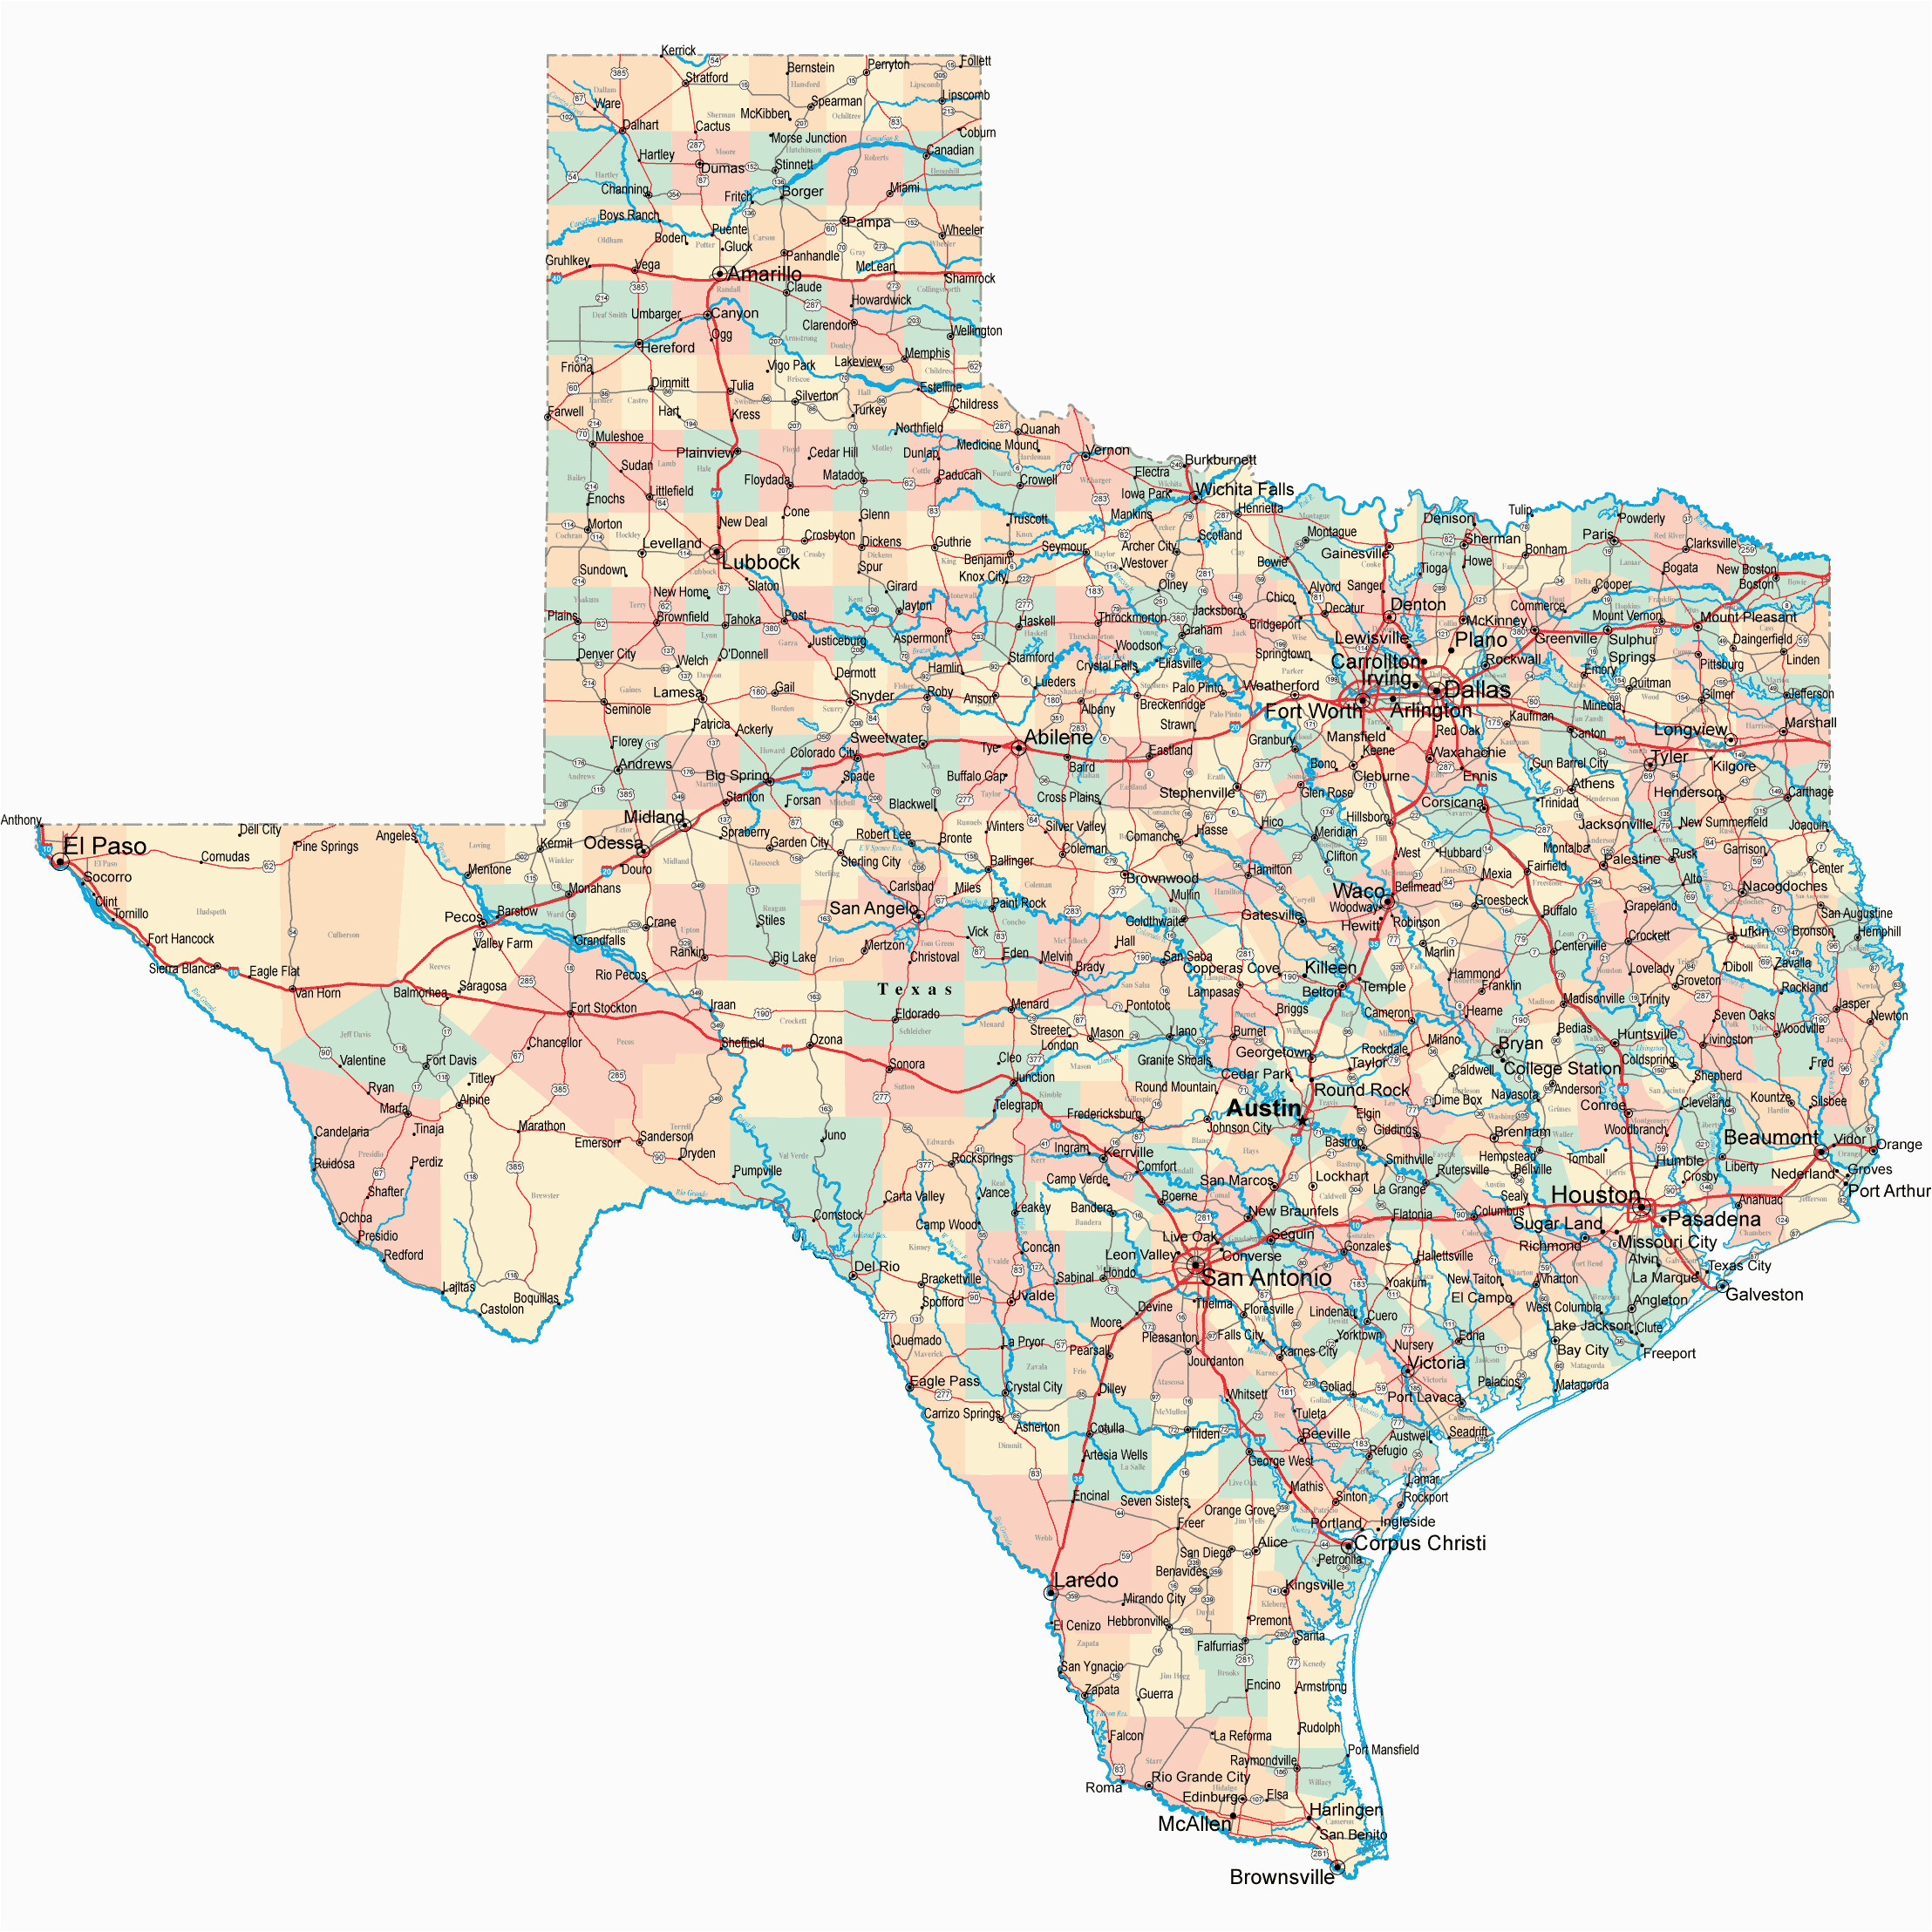 Texas Highway Map Online Texas County Map with Highways Business Ideas 2013